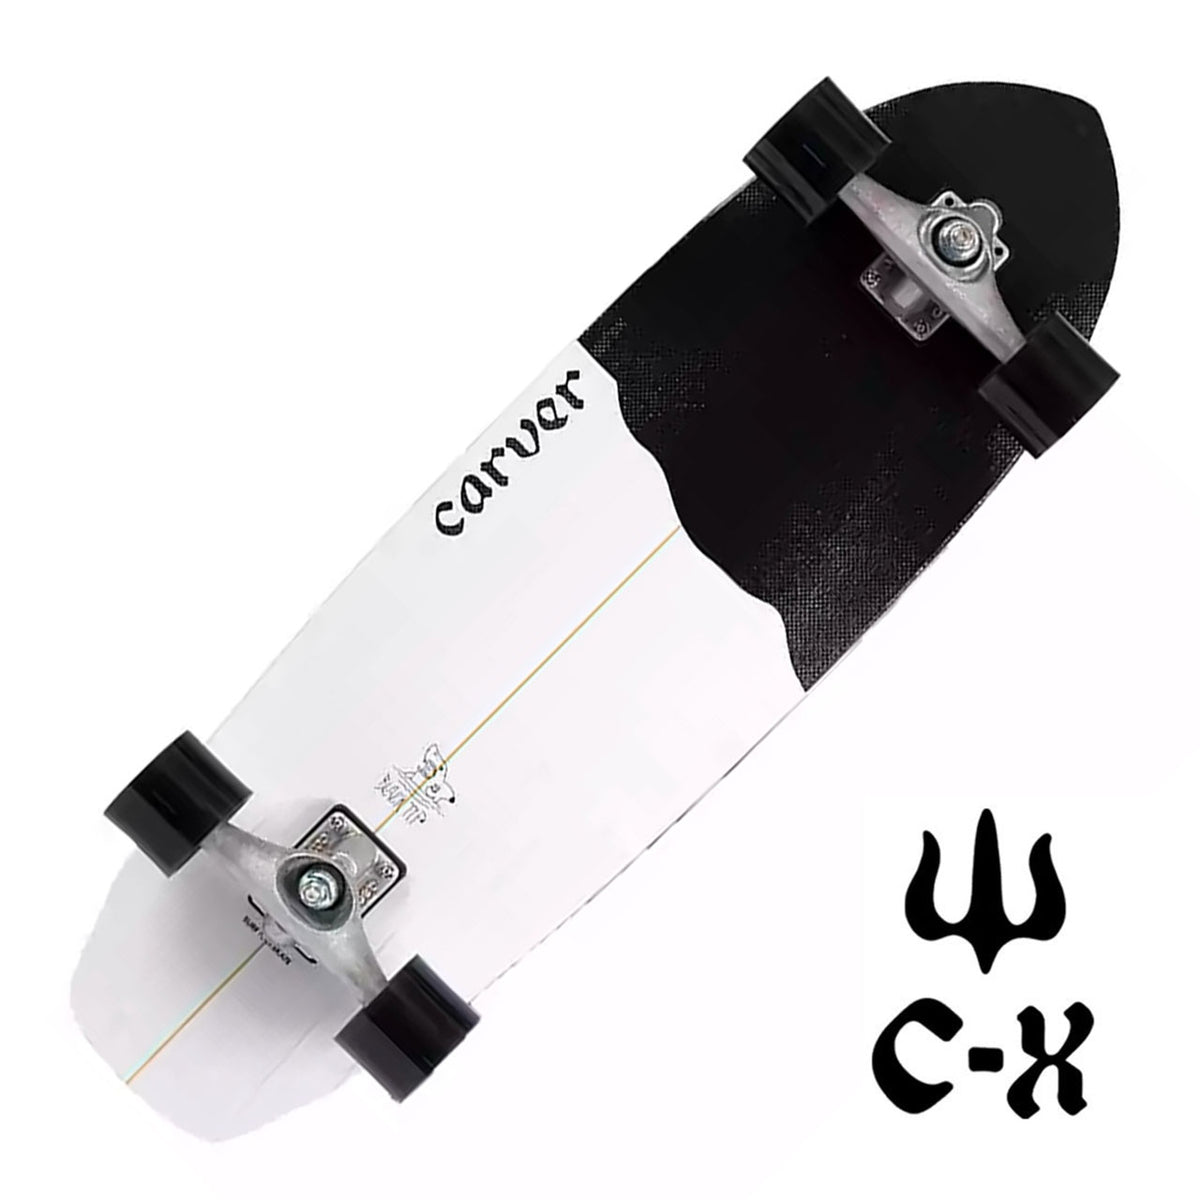 Carver Black Tip 32.5 Complete CX Skateboard Compl Carving and Specialty